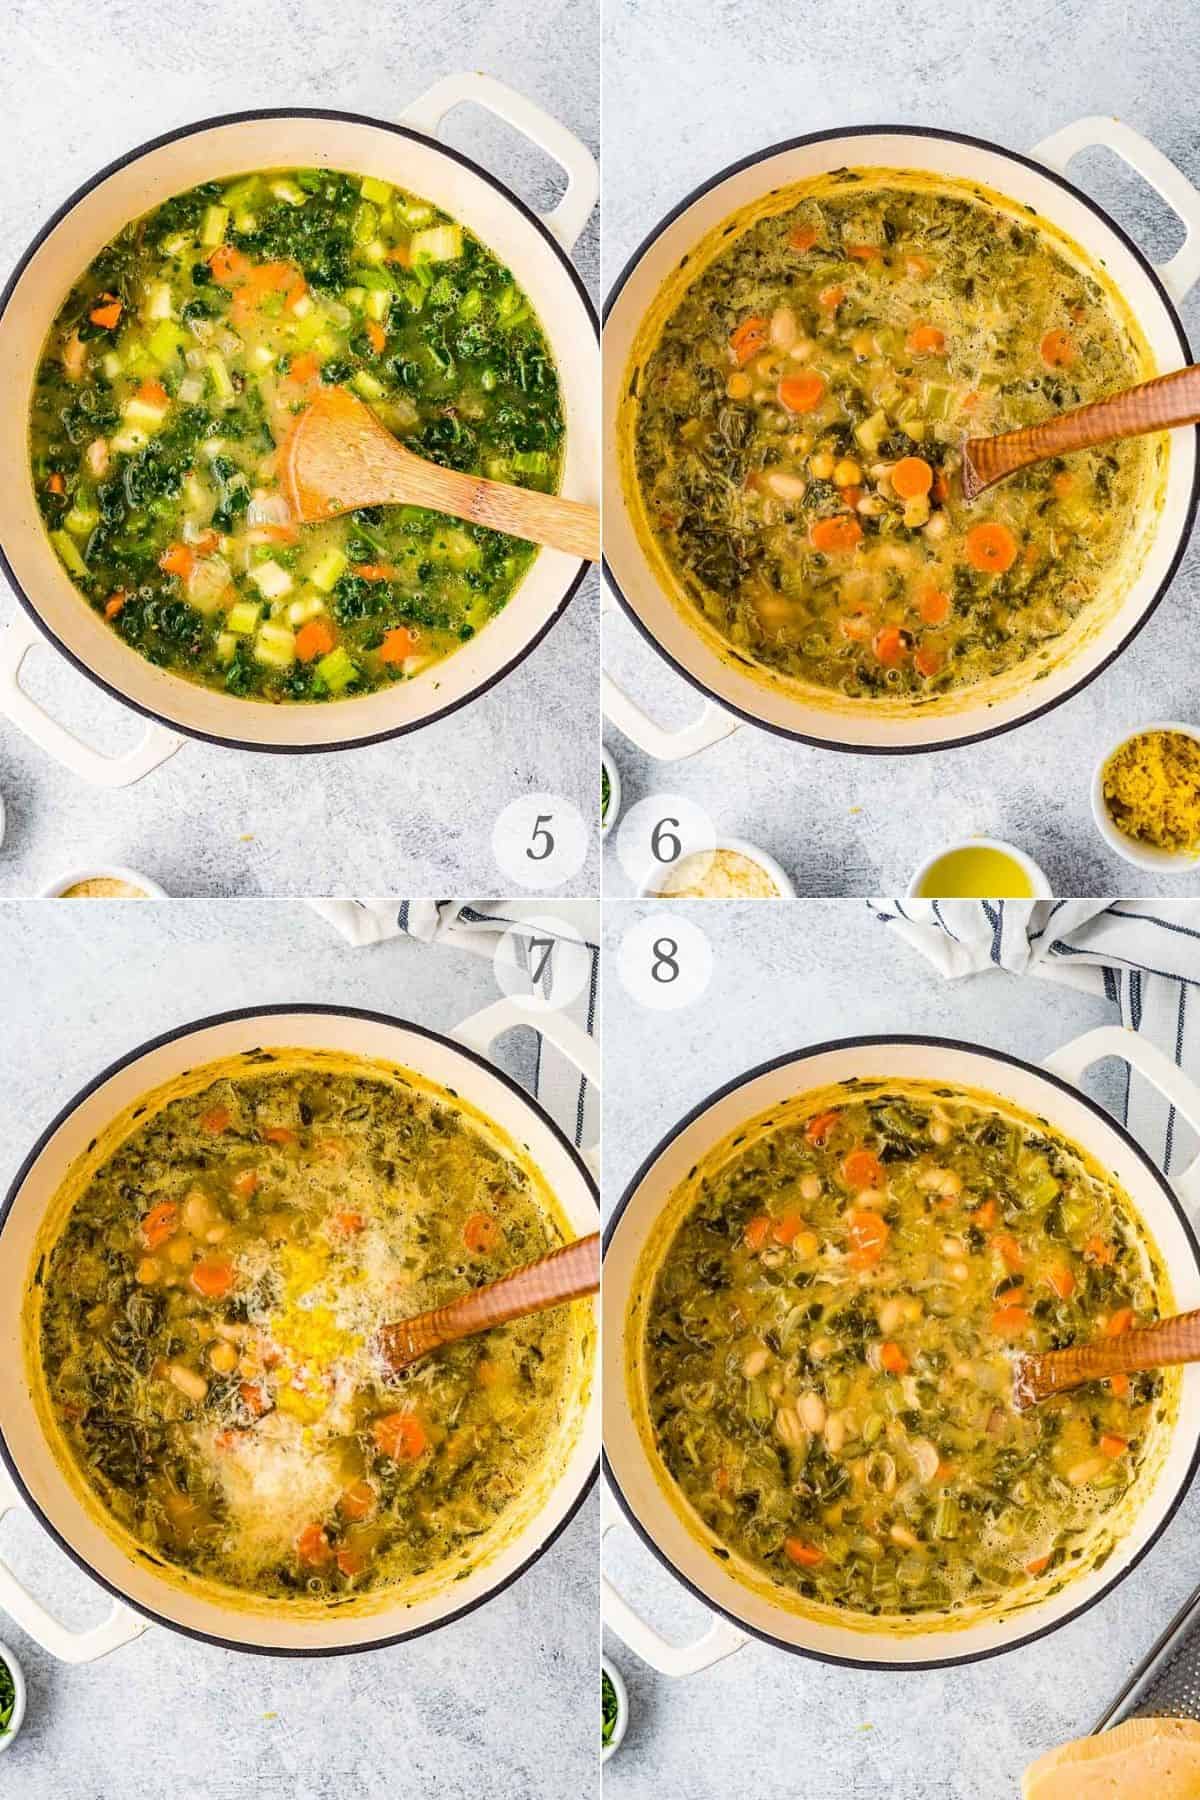 kale and bean soup recipe steps 5-8